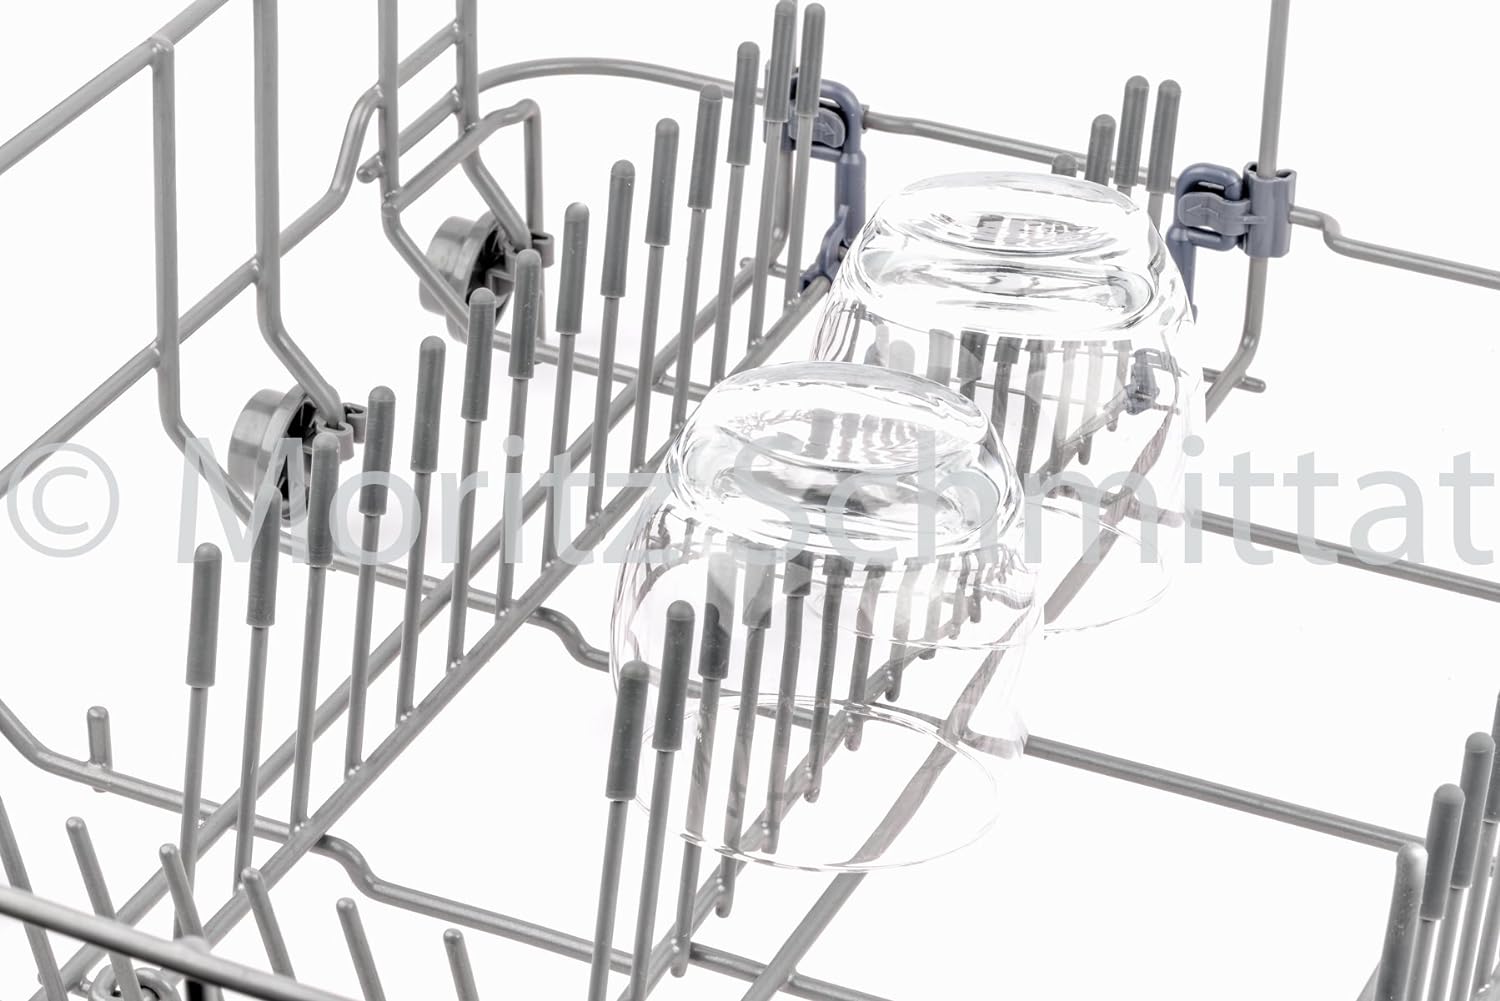 The Original Smith’s Dishwasher Rack Caps (Set of 100, Colour: Grey, Material: PVC) - Dishwasher Protection Prongs | Fits All Dishwasher Models | Made in The EU | 1 Year Money Back Guarantee! - Amazing Gadgets Outlet